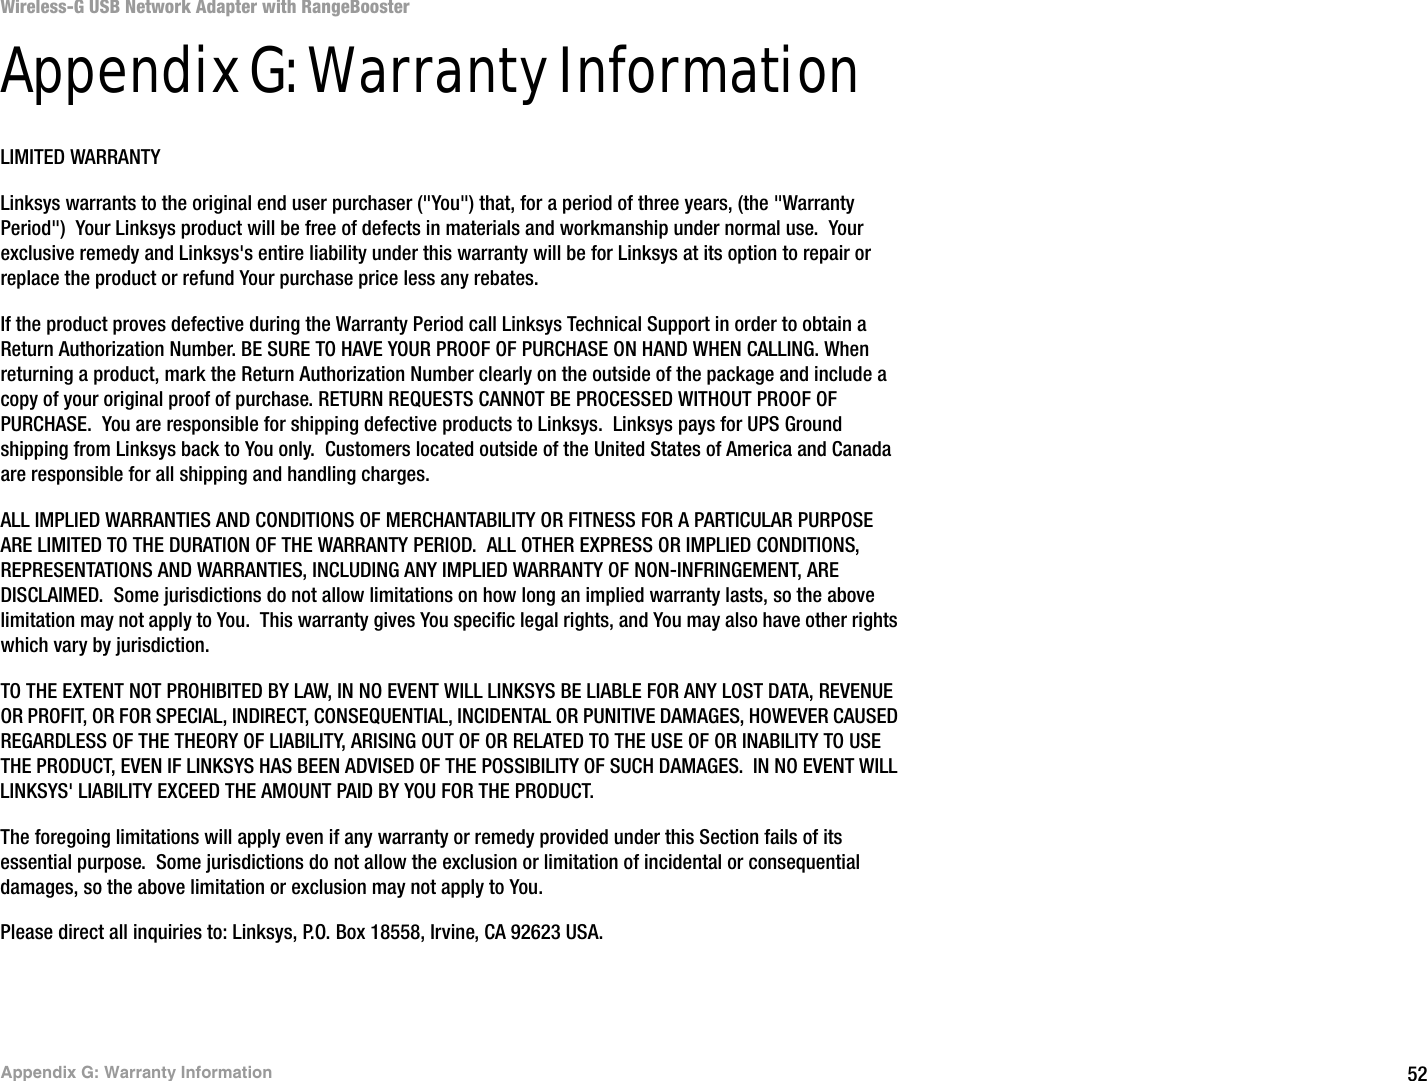 52Appendix G: Warranty InformationWireless-G USB Network Adapter with RangeBoosterAppendix G: Warranty InformationLIMITED WARRANTYLinksys warrants to the original end user purchaser (&quot;You&quot;) that, for a period of three years, (the &quot;Warranty Period&quot;)  Your Linksys product will be free of defects in materials and workmanship under normal use.  Your exclusive remedy and Linksys&apos;s entire liability under this warranty will be for Linksys at its option to repair or replace the product or refund Your purchase price less any rebates.If the product proves defective during the Warranty Period call Linksys Technical Support in order to obtain a Return Authorization Number. BE SURE TO HAVE YOUR PROOF OF PURCHASE ON HAND WHEN CALLING. When returning a product, mark the Return Authorization Number clearly on the outside of the package and include a copy of your original proof of purchase. RETURN REQUESTS CANNOT BE PROCESSED WITHOUT PROOF OF PURCHASE.  You are responsible for shipping defective products to Linksys.  Linksys pays for UPS Ground shipping from Linksys back to You only.  Customers located outside of the United States of America and Canada are responsible for all shipping and handling charges. ALL IMPLIED WARRANTIES AND CONDITIONS OF MERCHANTABILITY OR FITNESS FOR A PARTICULAR PURPOSE ARE LIMITED TO THE DURATION OF THE WARRANTY PERIOD.  ALL OTHER EXPRESS OR IMPLIED CONDITIONS, REPRESENTATIONS AND WARRANTIES, INCLUDING ANY IMPLIED WARRANTY OF NON-INFRINGEMENT, ARE DISCLAIMED.  Some jurisdictions do not allow limitations on how long an implied warranty lasts, so the above limitation may not apply to You.  This warranty gives You specific legal rights, and You may also have other rights which vary by jurisdiction.TO THE EXTENT NOT PROHIBITED BY LAW, IN NO EVENT WILL LINKSYS BE LIABLE FOR ANY LOST DATA, REVENUE OR PROFIT, OR FOR SPECIAL, INDIRECT, CONSEQUENTIAL, INCIDENTAL OR PUNITIVE DAMAGES, HOWEVER CAUSED REGARDLESS OF THE THEORY OF LIABILITY, ARISING OUT OF OR RELATED TO THE USE OF OR INABILITY TO USE THE PRODUCT, EVEN IF LINKSYS HAS BEEN ADVISED OF THE POSSIBILITY OF SUCH DAMAGES.  IN NO EVENT WILL LINKSYS&apos; LIABILITY EXCEED THE AMOUNT PAID BY YOU FOR THE PRODUCT.  The foregoing limitations will apply even if any warranty or remedy provided under this Section fails of its essential purpose.  Some jurisdictions do not allow the exclusion or limitation of incidental or consequential damages, so the above limitation or exclusion may not apply to You.Please direct all inquiries to: Linksys, P.O. Box 18558, Irvine, CA 92623 USA.